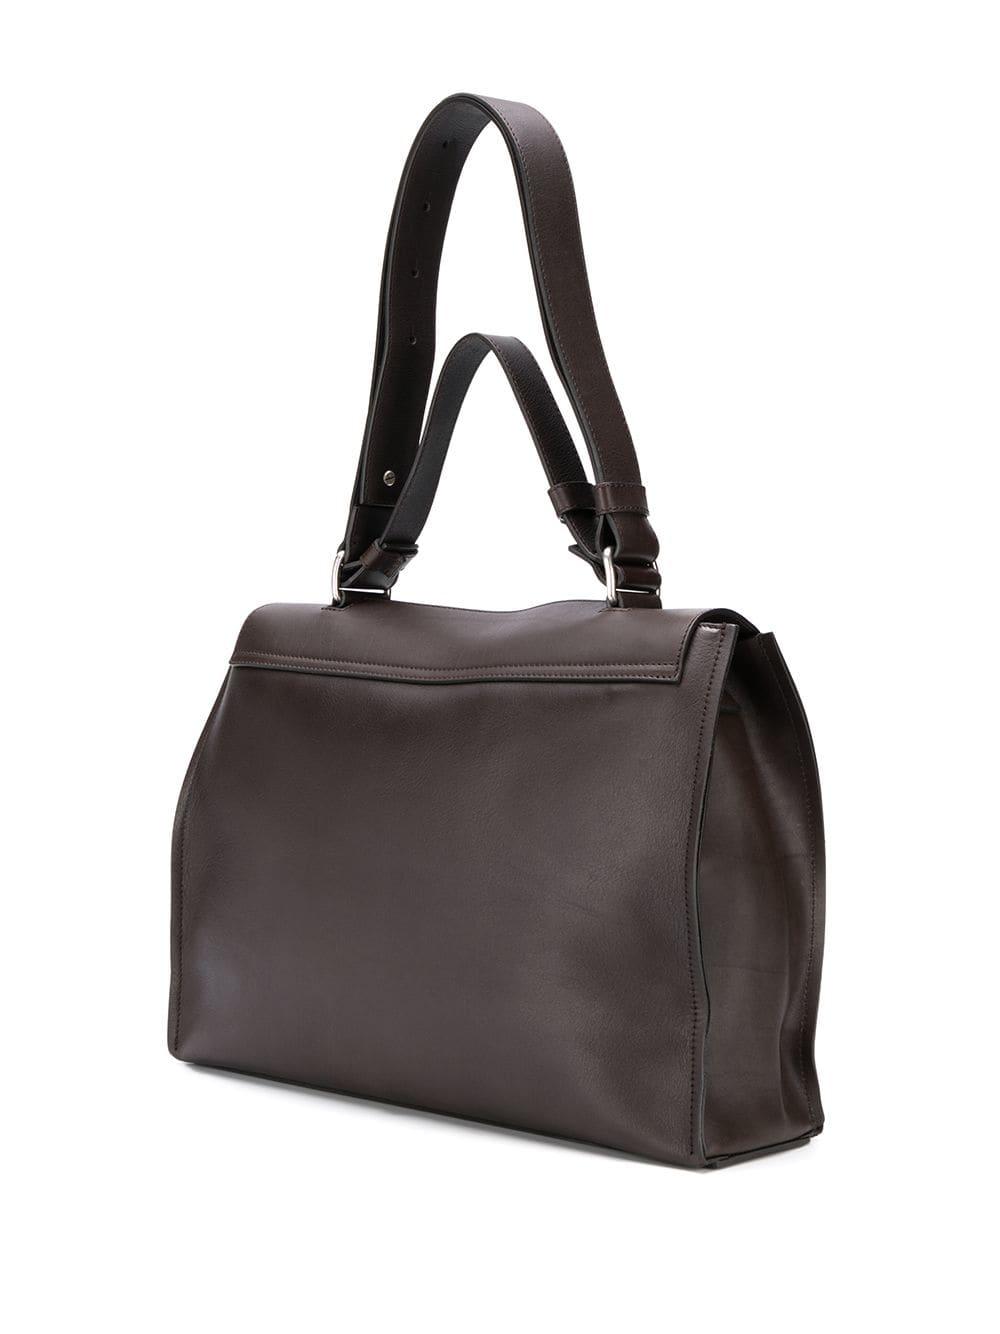 Orciani Leather Foldover Briefcase in Brown for Men - Lyst